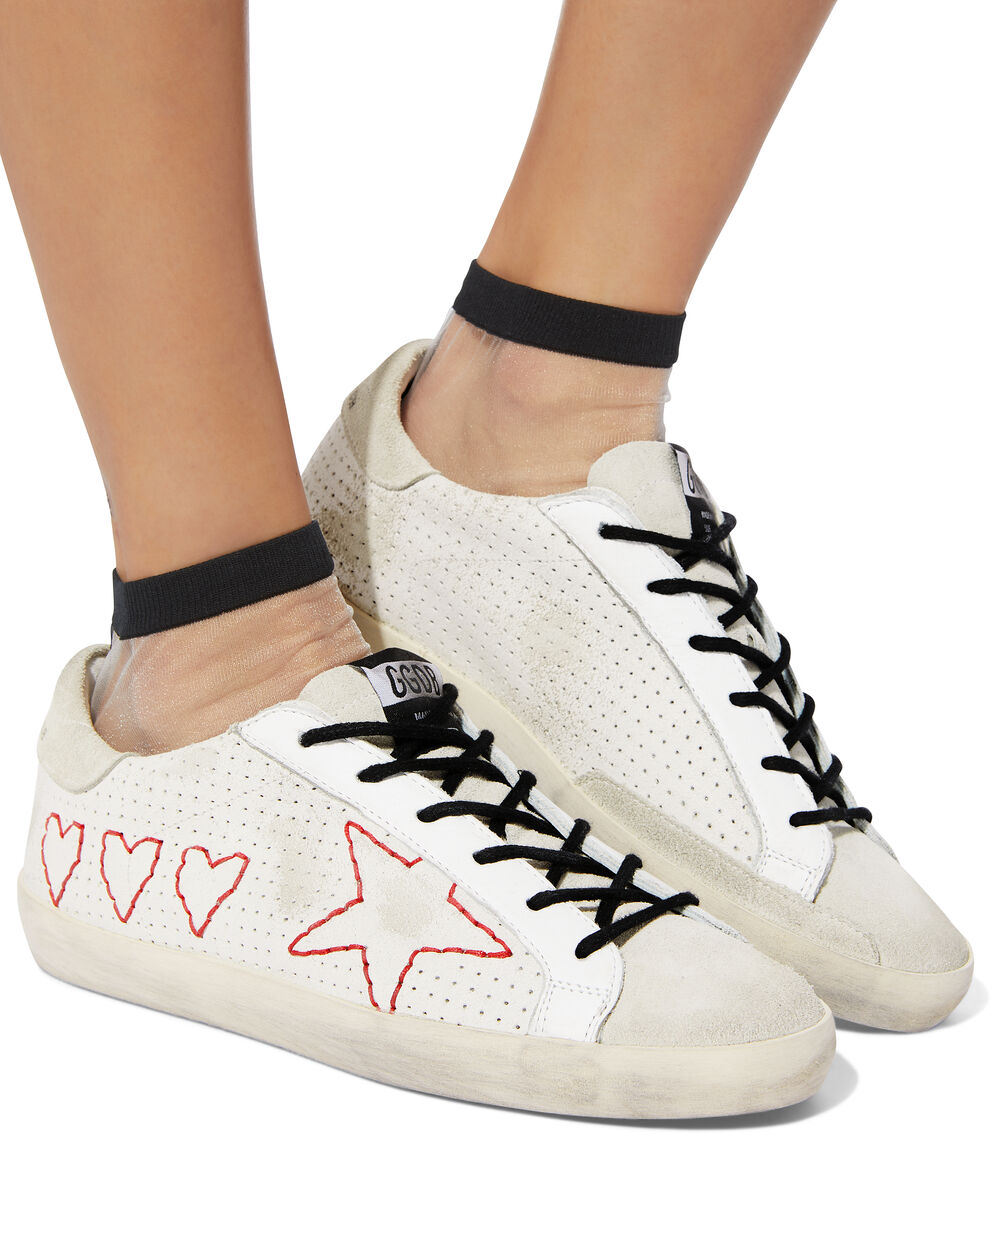 Red Stitched Superstar Whire Sneakers | Golden Goose